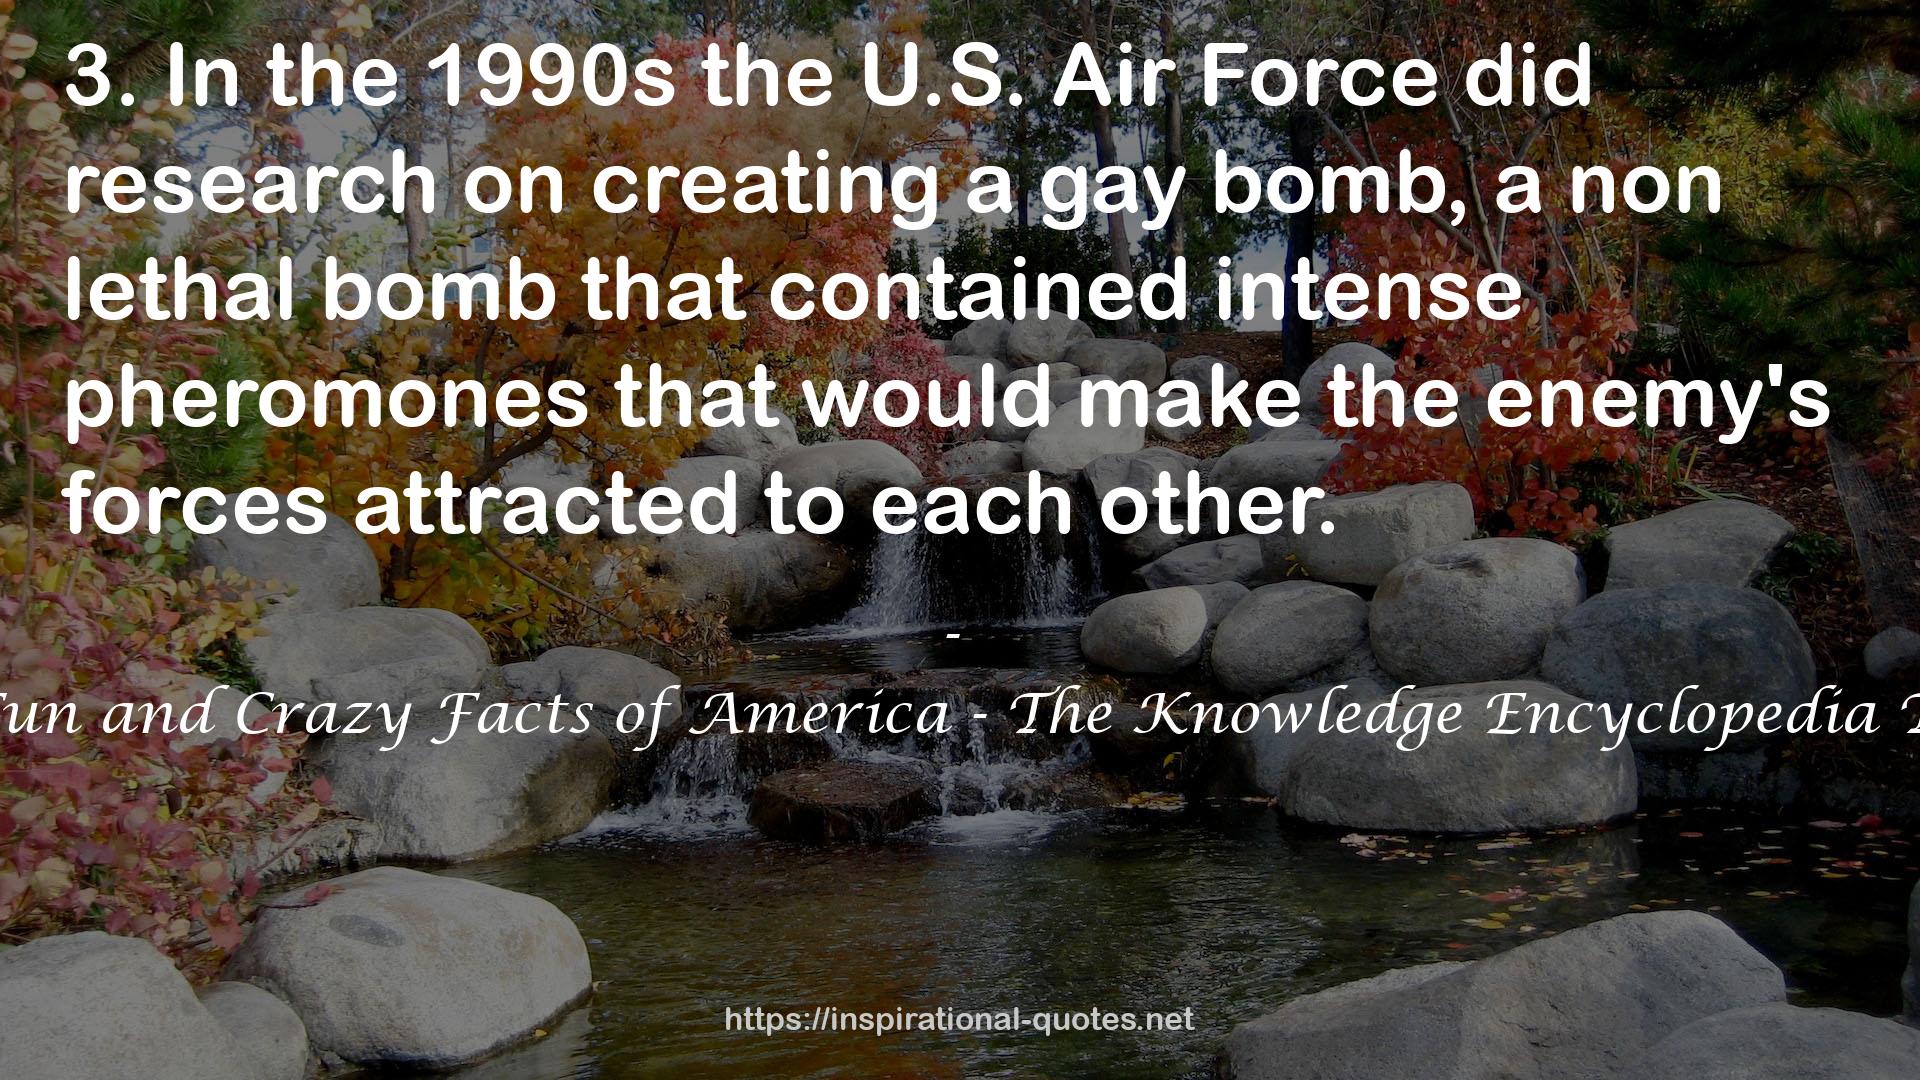 Interesting, Fun and Crazy Facts of America - The Knowledge Encyclopedia To Win Trivia QUOTES